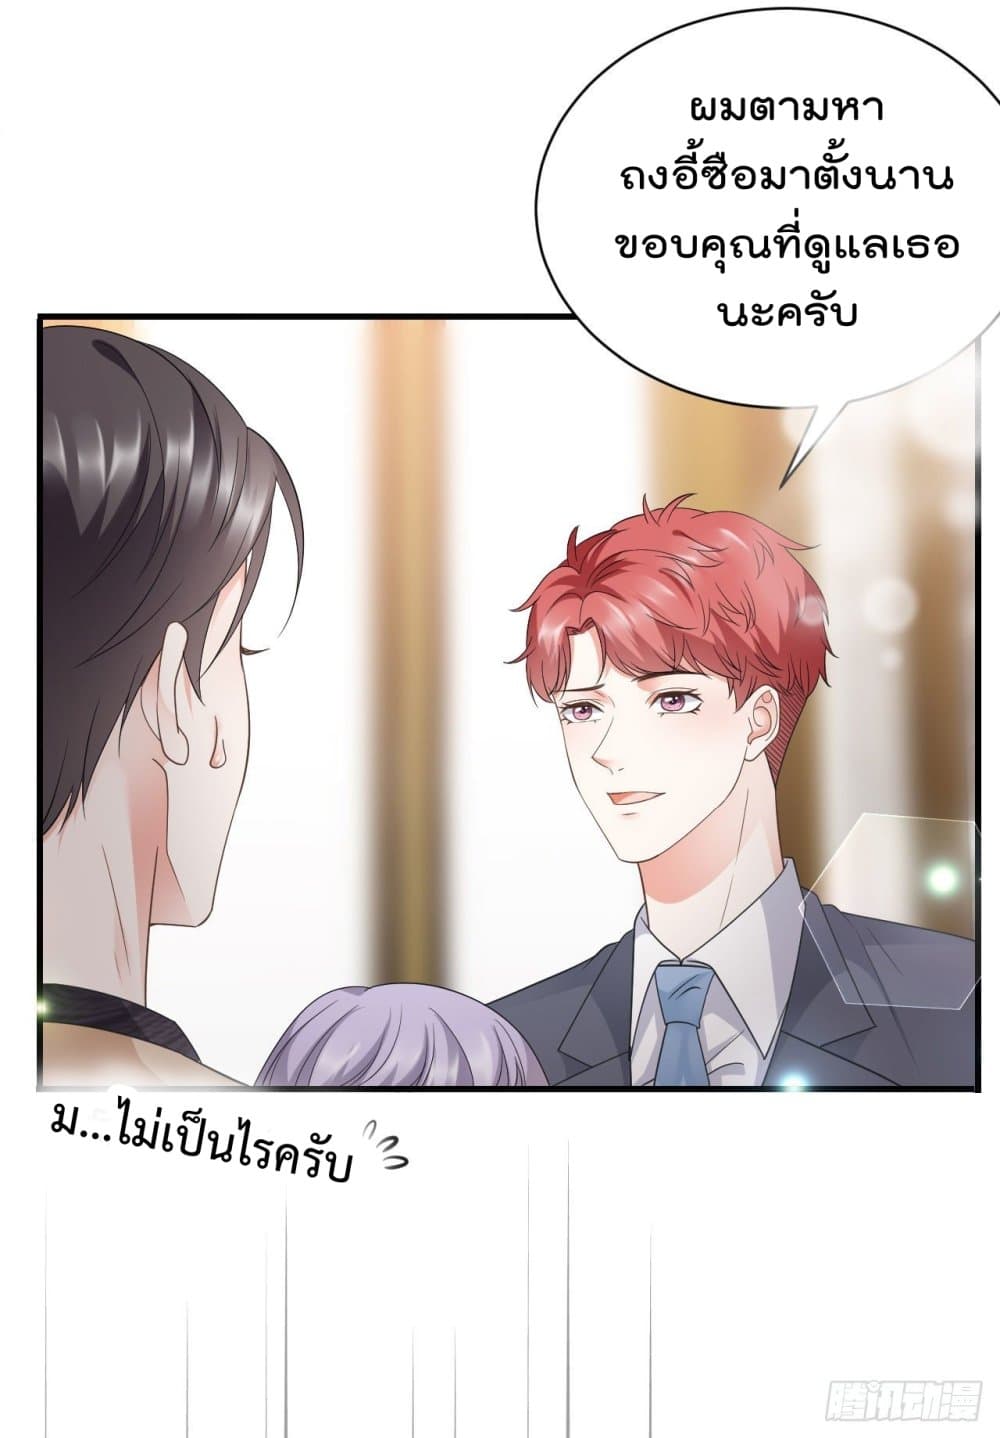 What Can the Eldest Lady Have คุณหนูใหญ่ ทำไมคุณร้ายอย่างนี้ 23-23